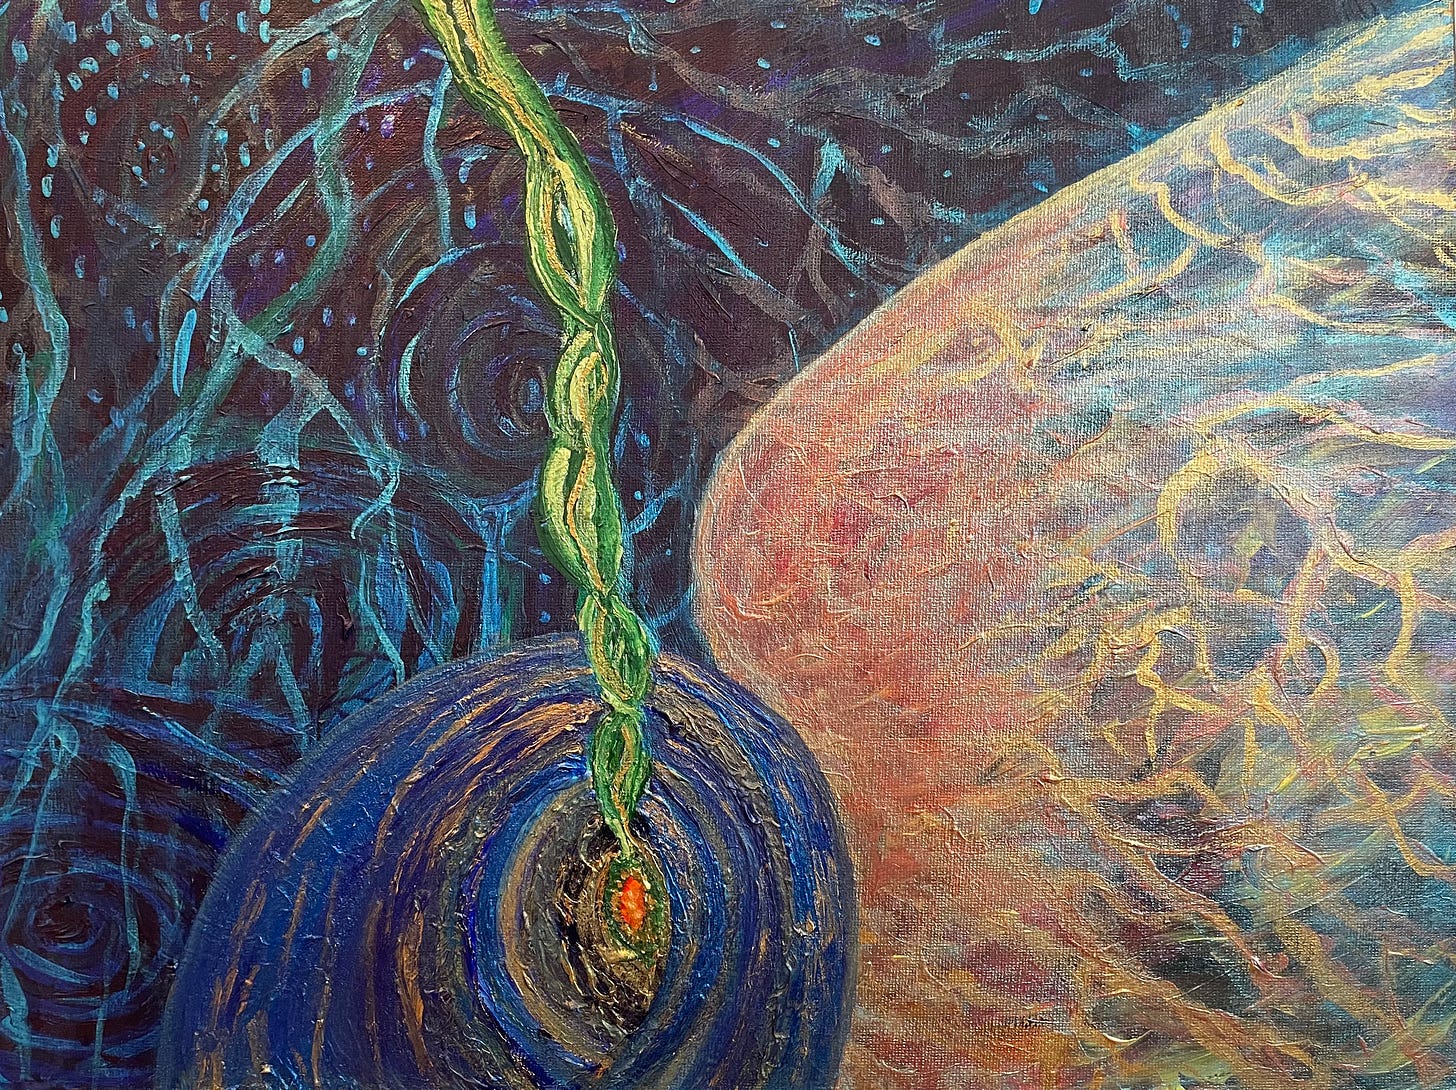 painting with background of cosmic spirals and webs, a vaguely human shape glowing with luminous threads, and a seed at the center with a vine sprouting from it like dna.